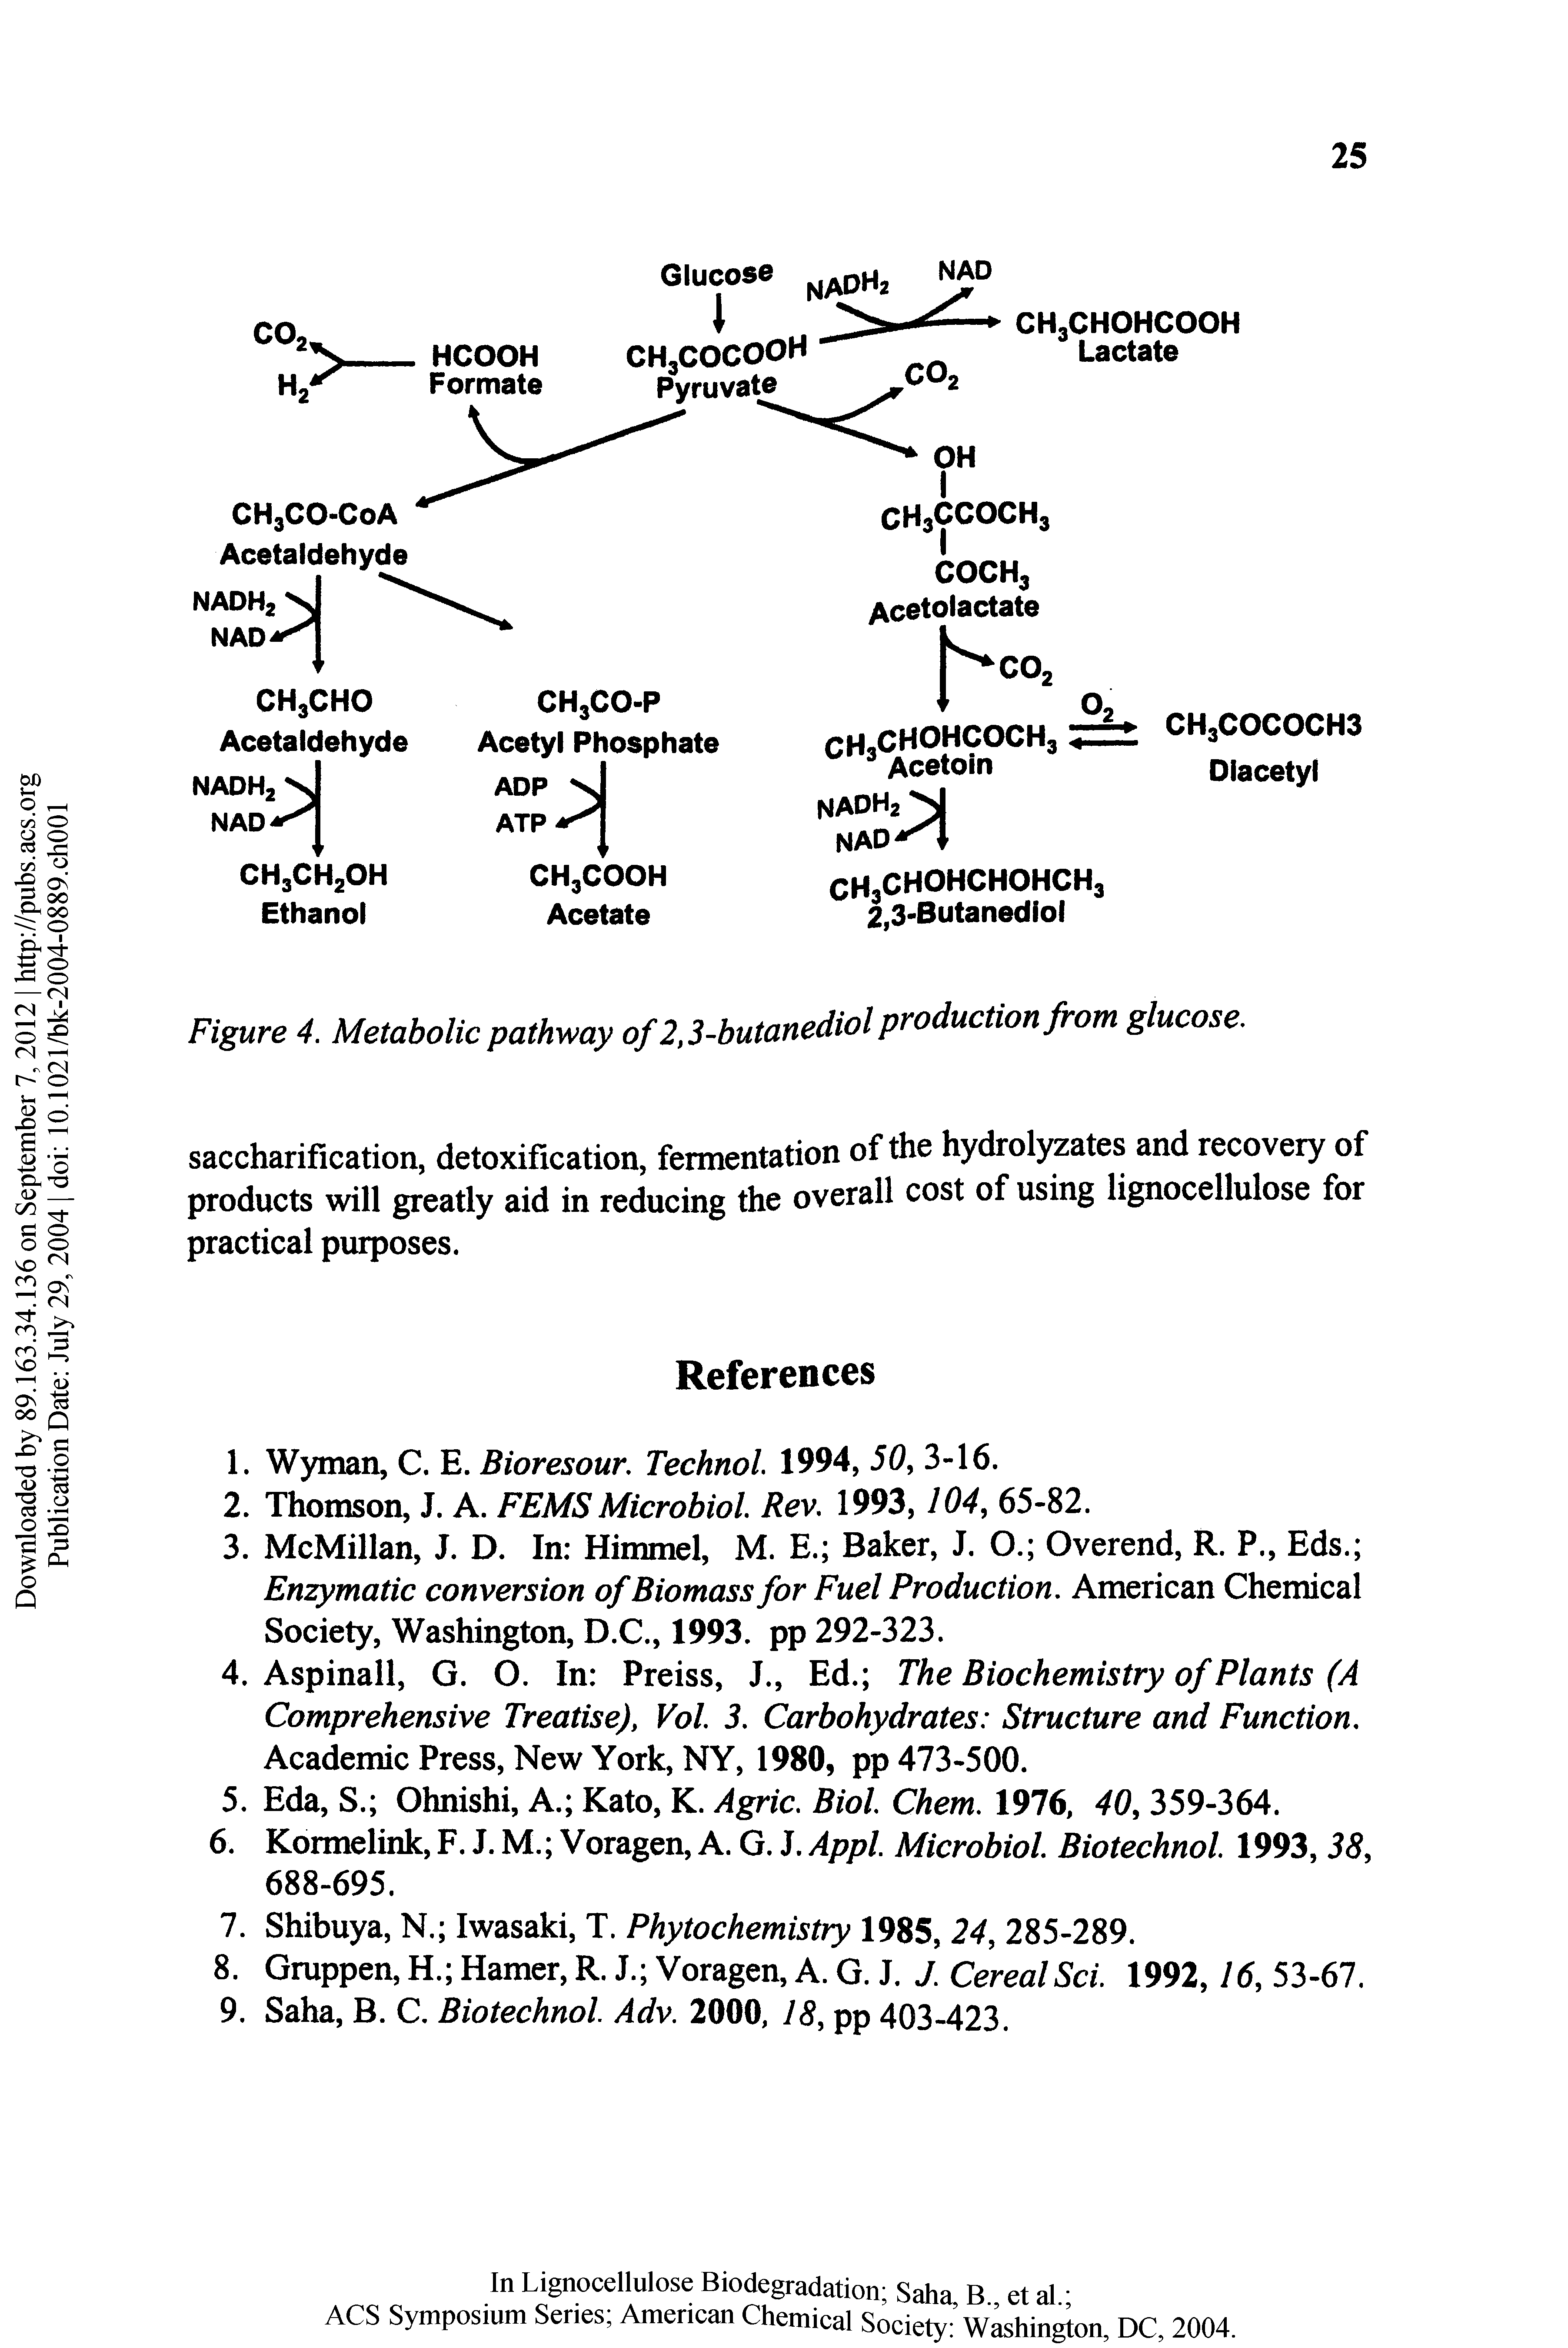 Figure 4. Metabolic pathway of 2,3-butanediol production from glucose.